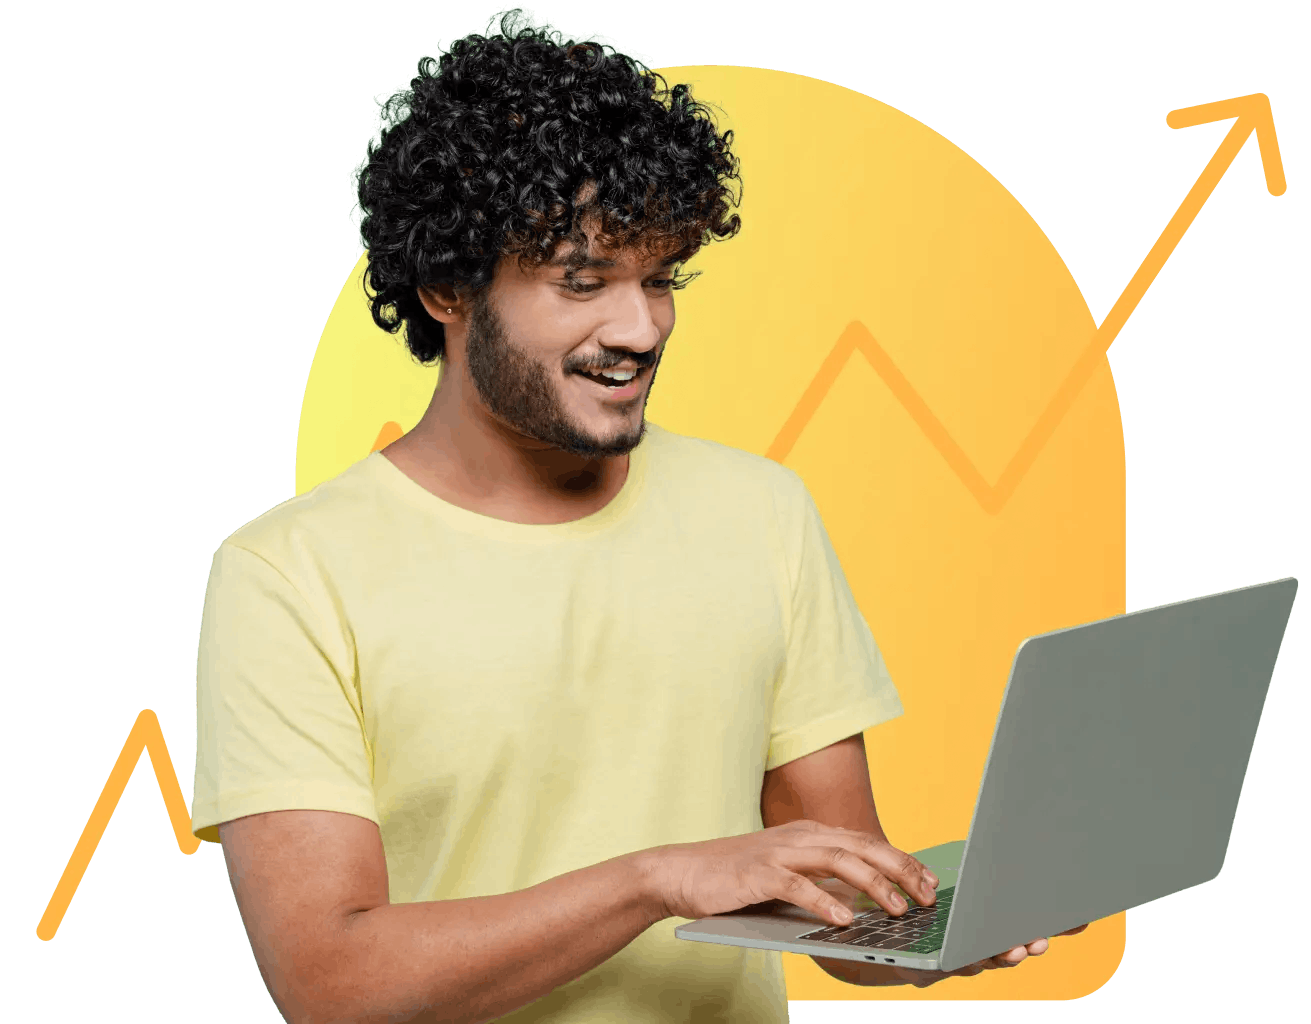 Smiling person typing on their laptop